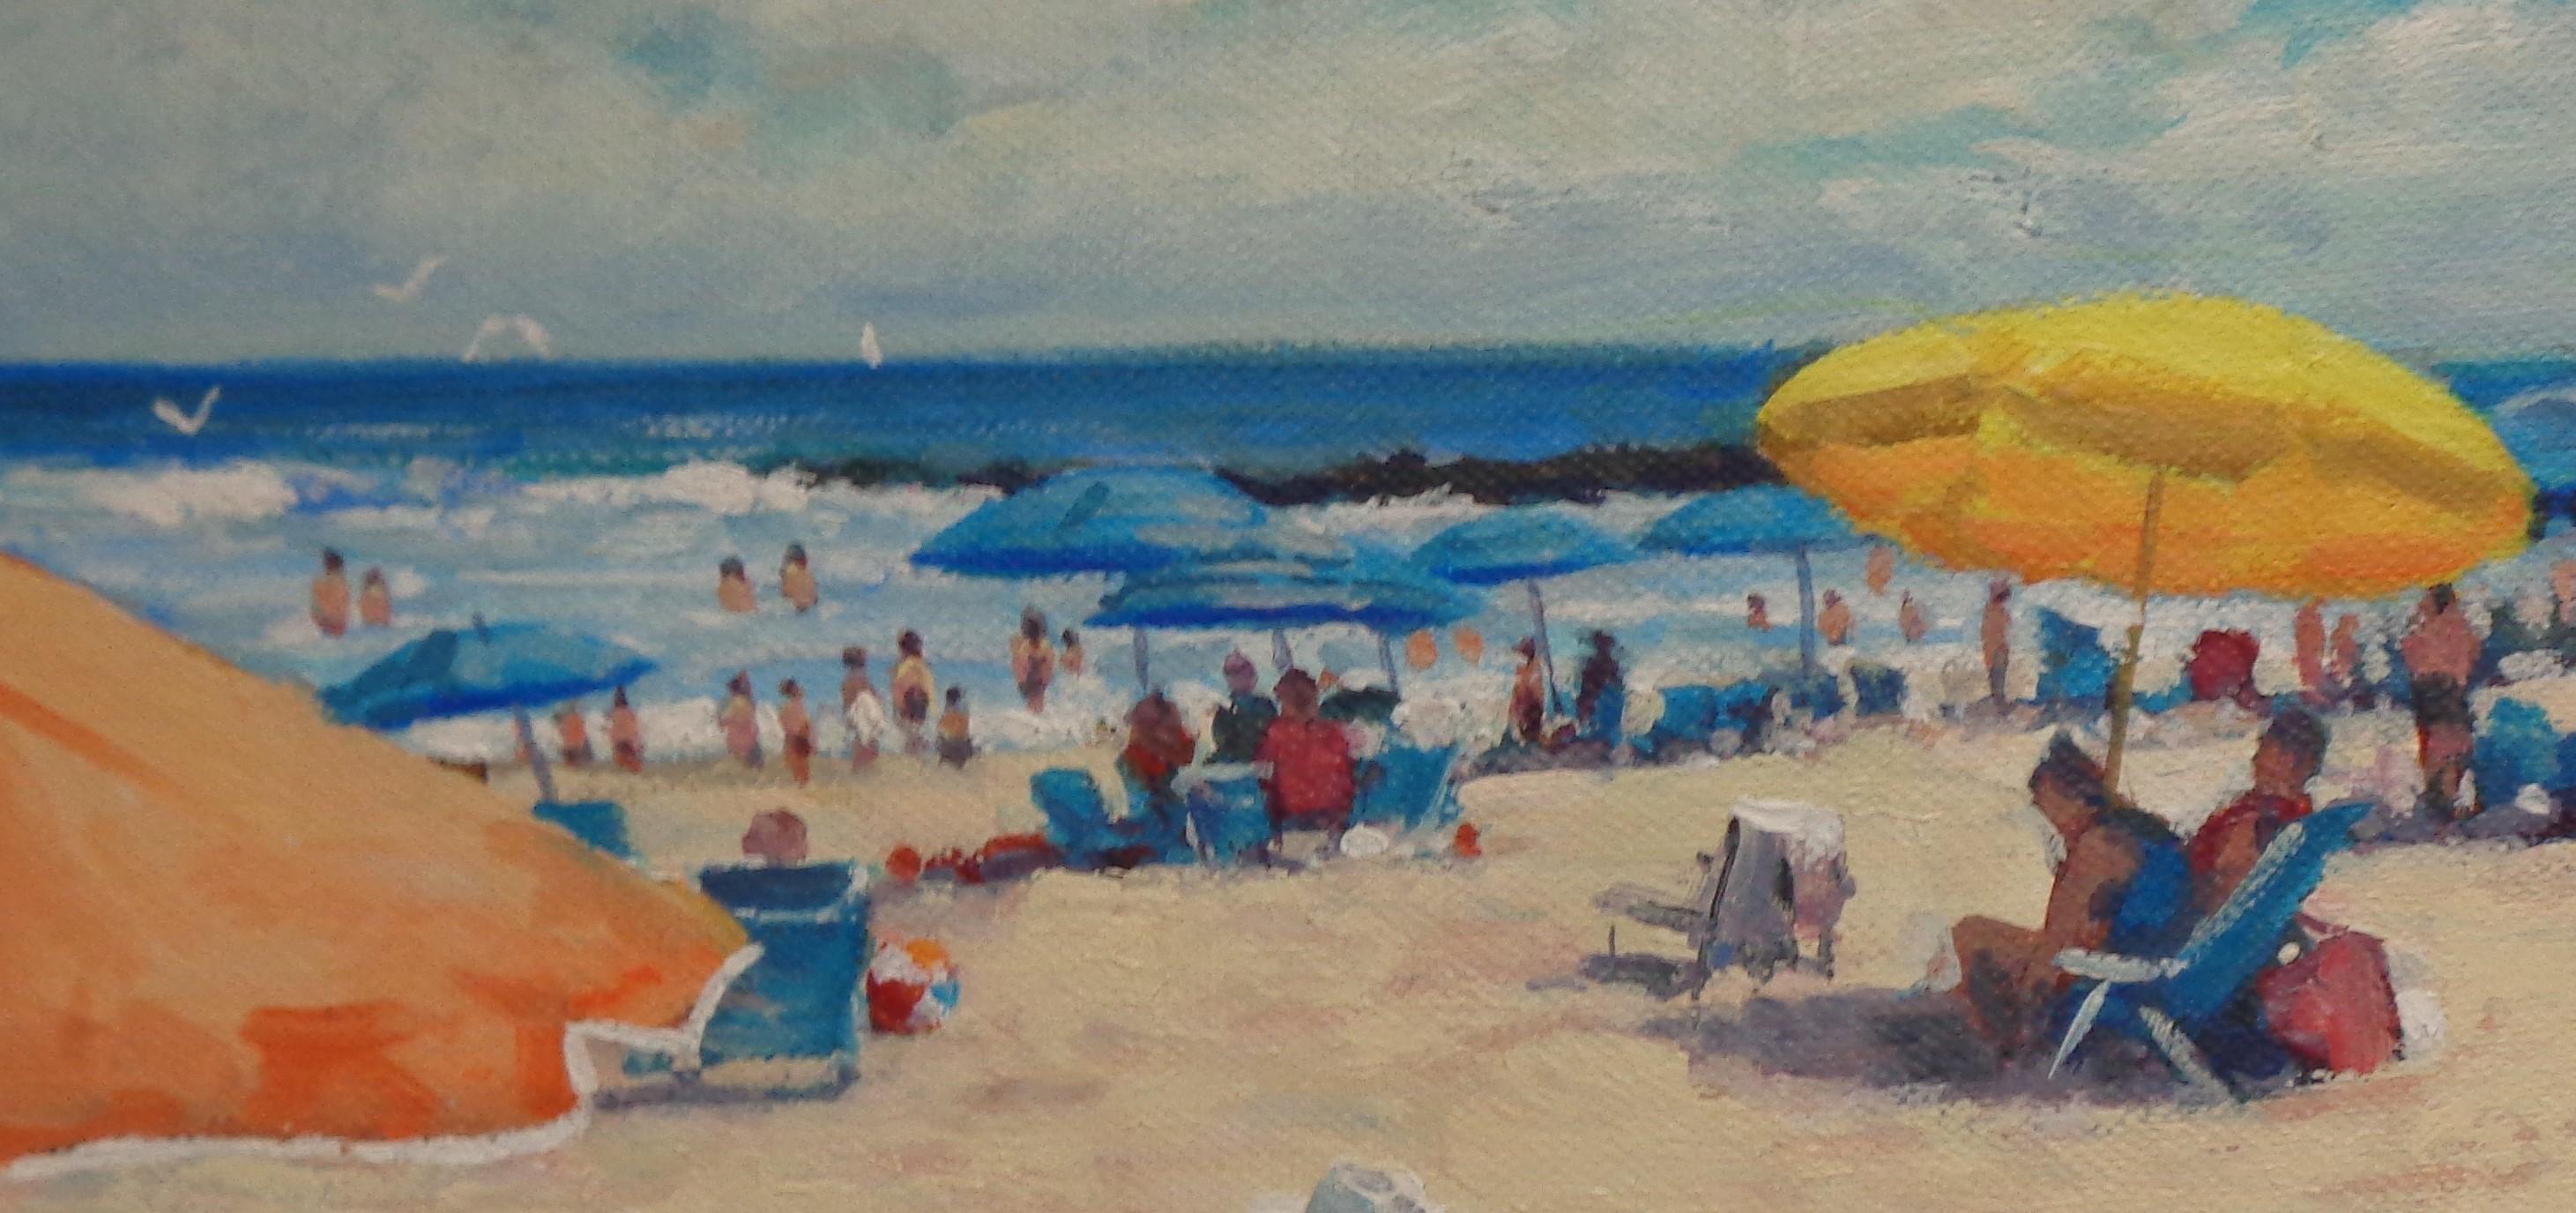  Impressionistic Seascape Painting Michael Budden Beach Day People Boats Birds For Sale 3